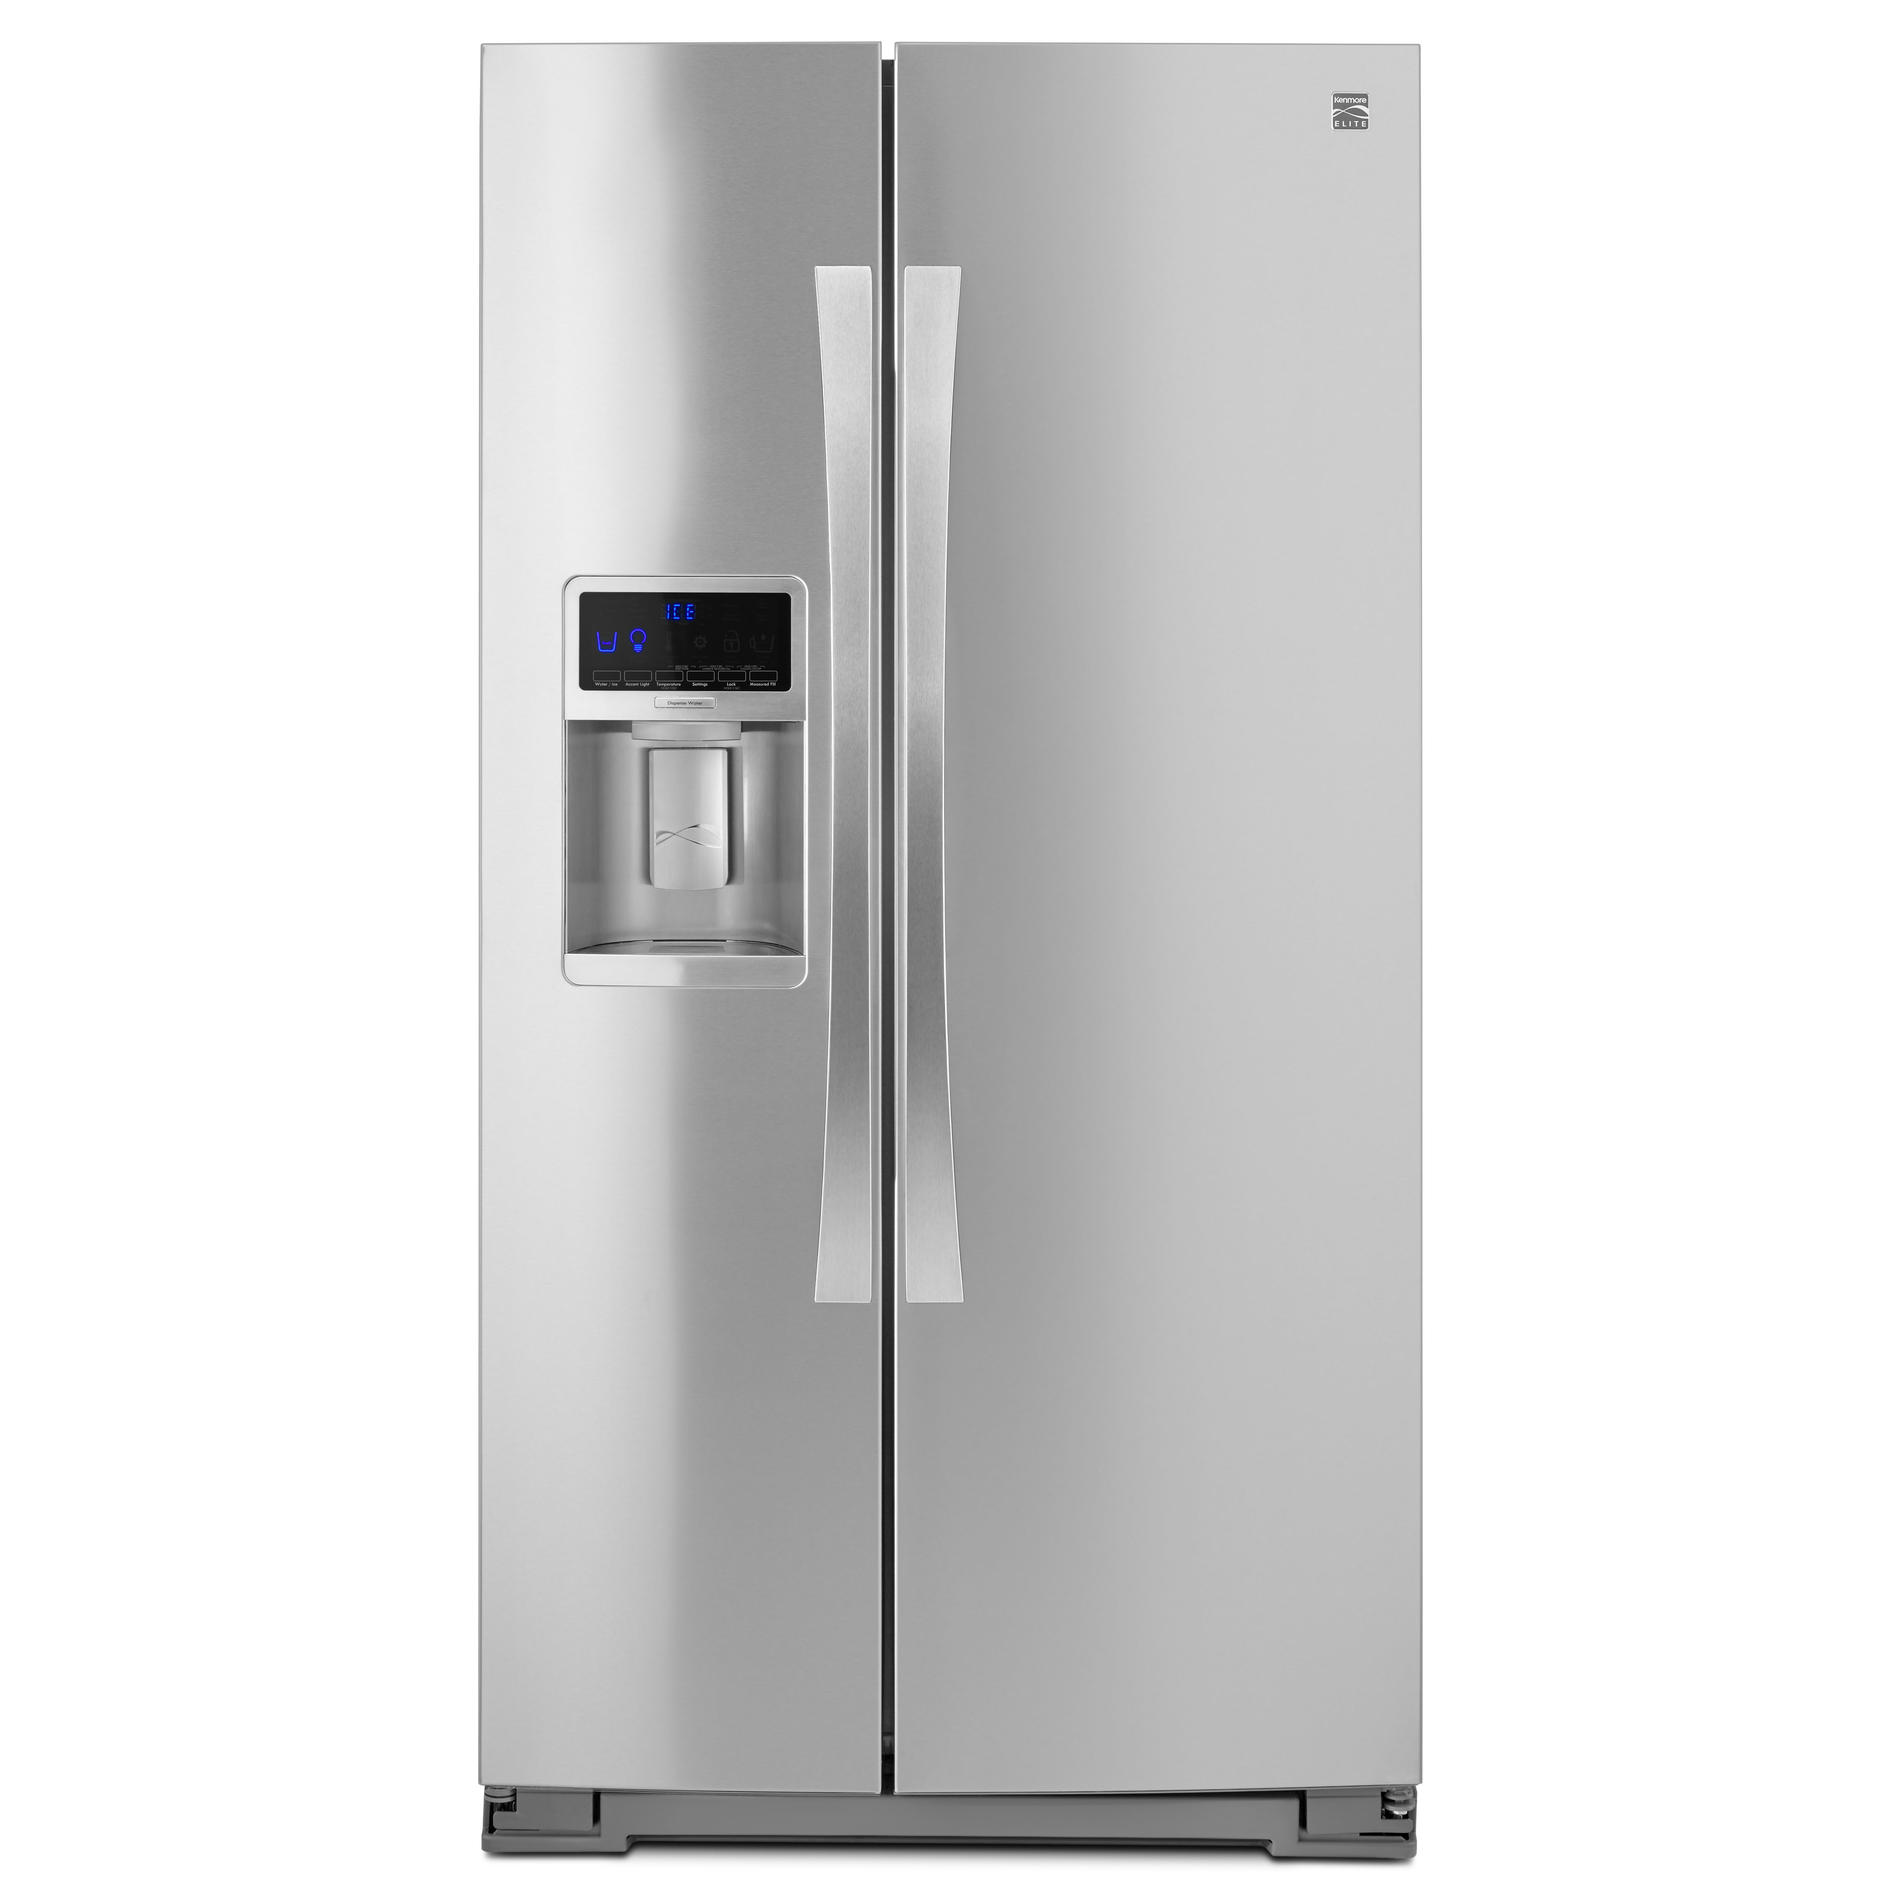 Kenmore Refrigerators: A Blend of Quality and Innovation插图4